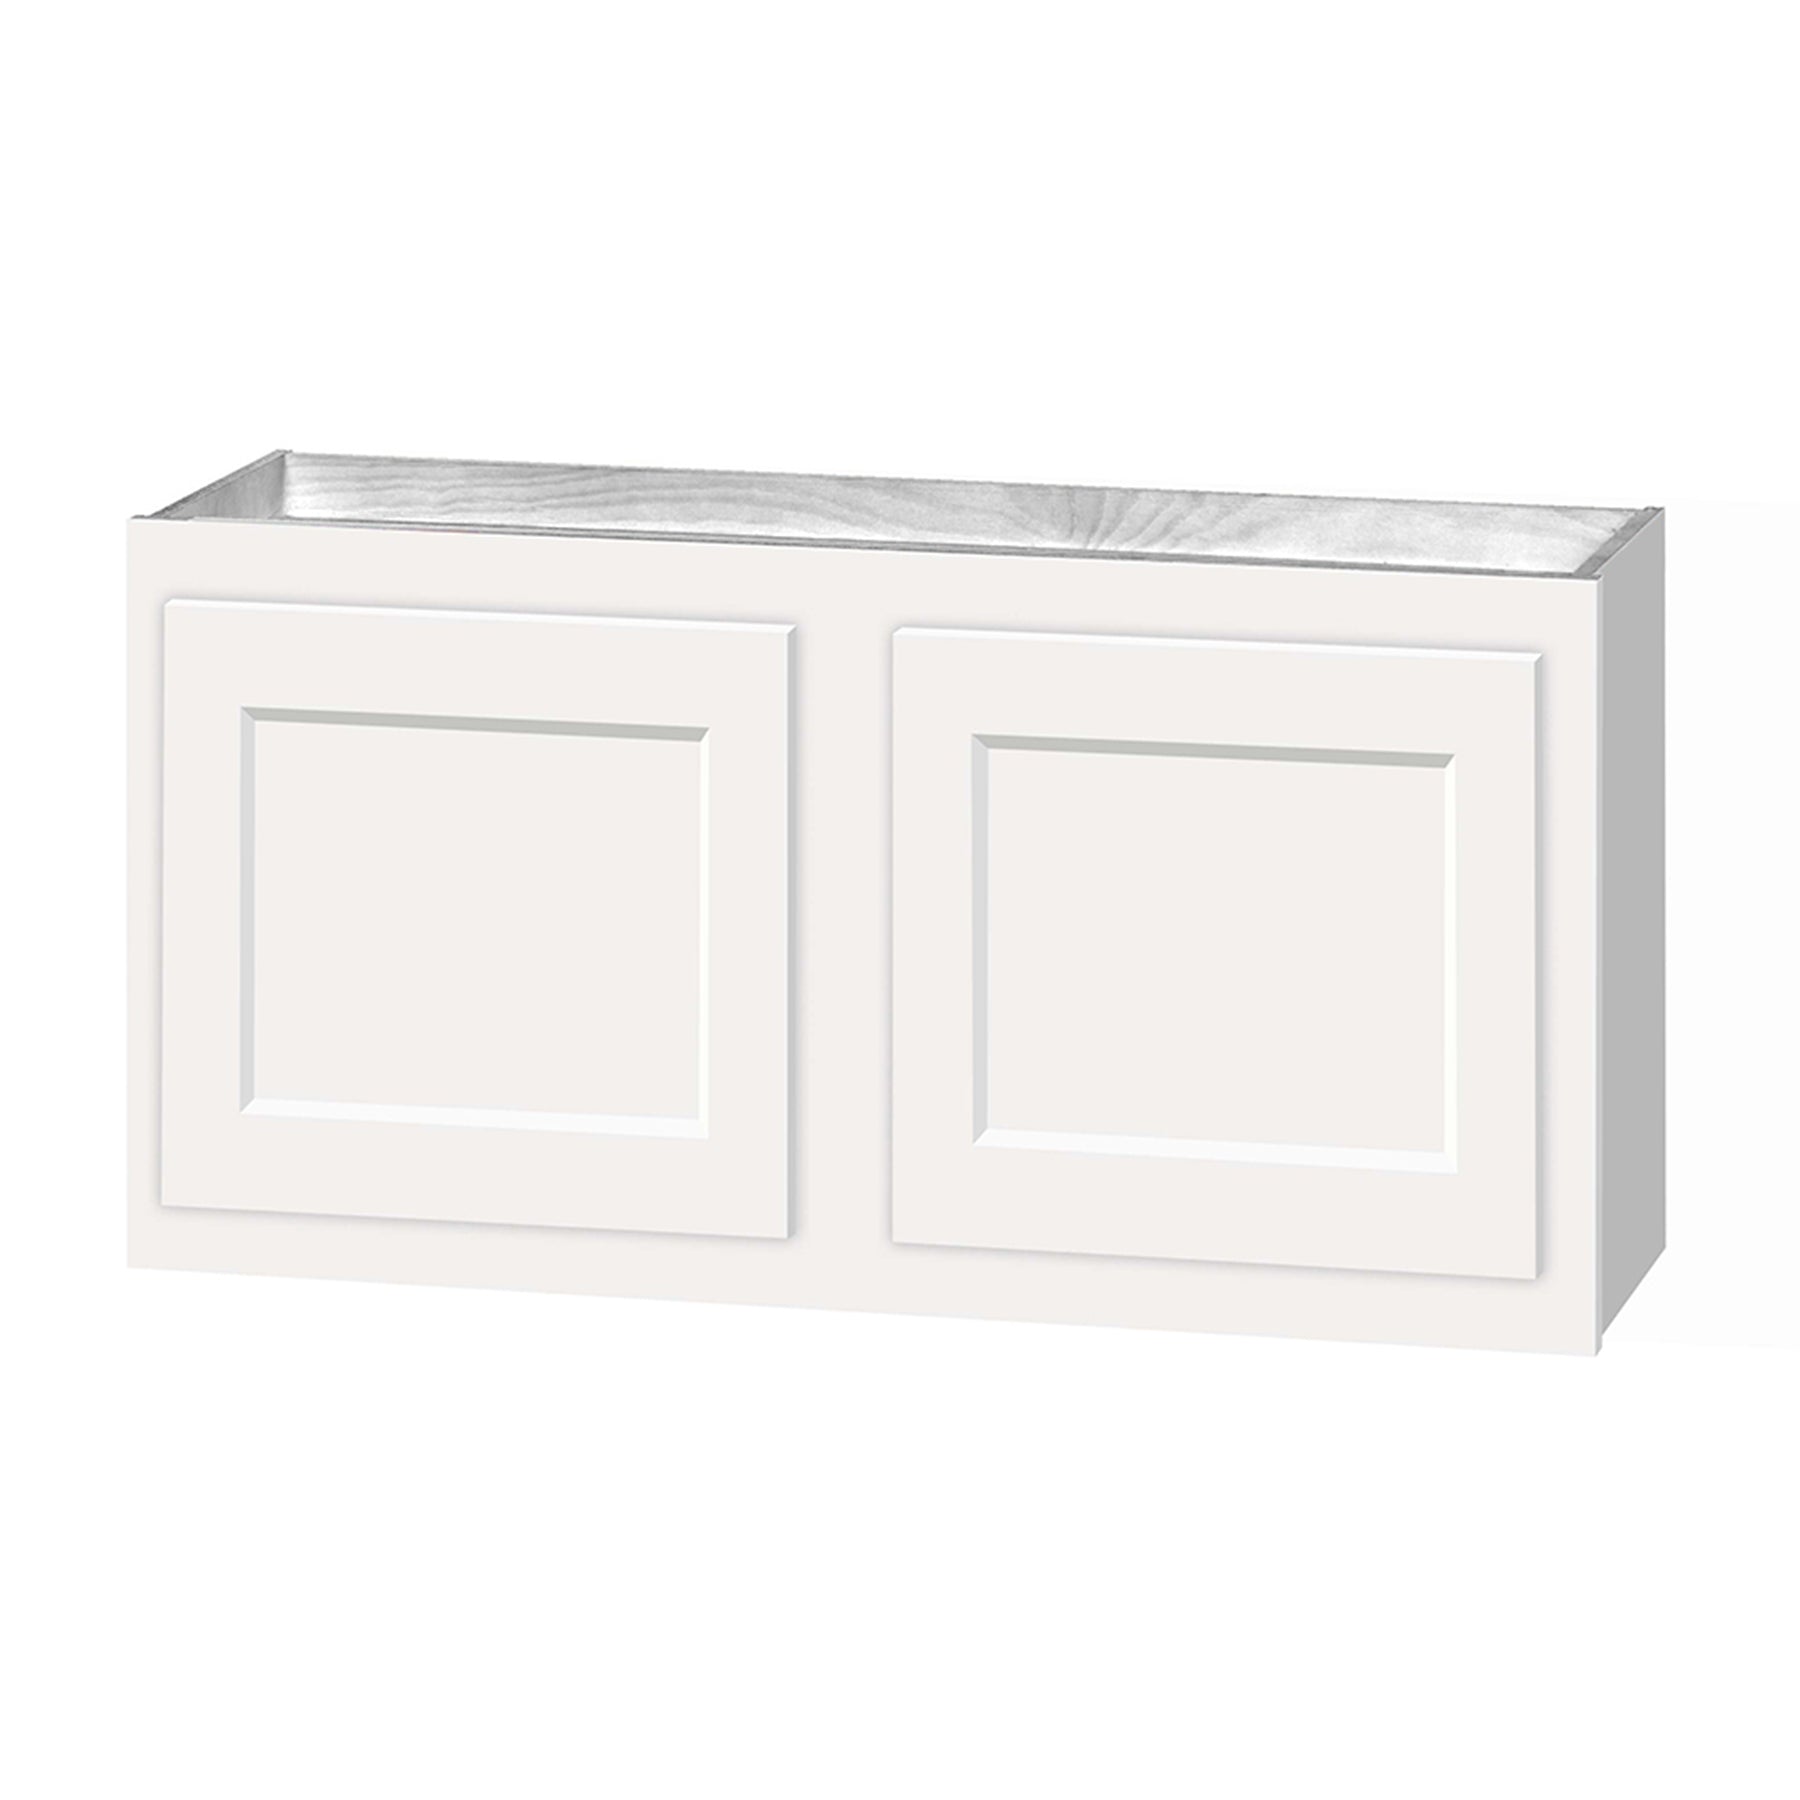 15 inch Wall Cabinets - Dwhite Shaker - 30 Inch W x 15 Inch H x 12 Inch D